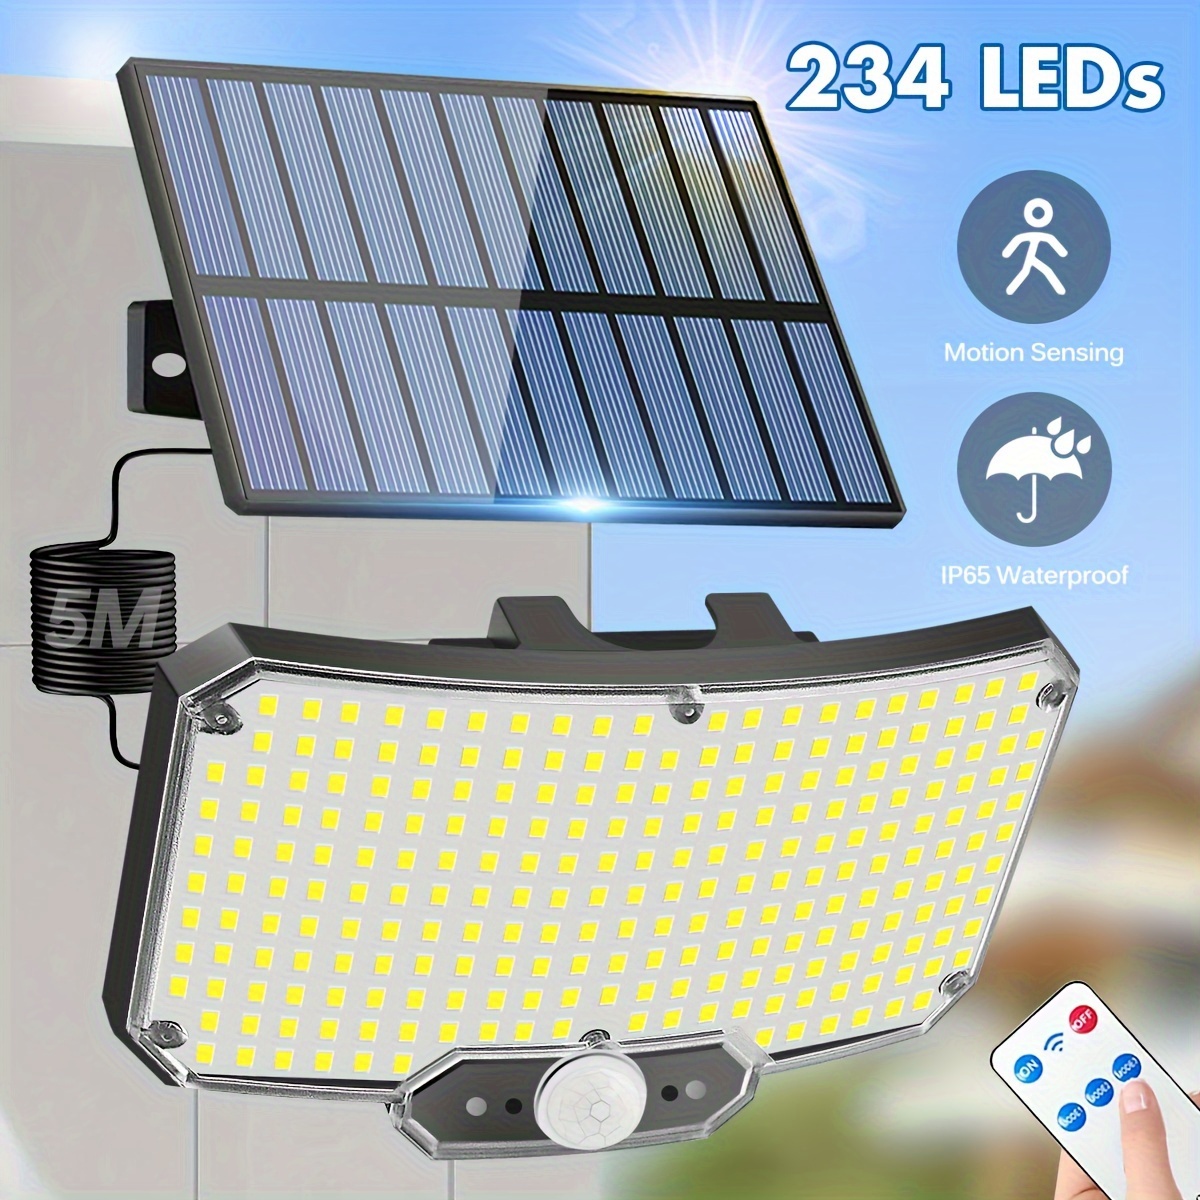 

Solar-powered Outdoor Lights With Motion Sensor - 234 Led, 3 Lighting Modes, 6500k, Easy Install For Yard, Garden, Pathway & Patio Security